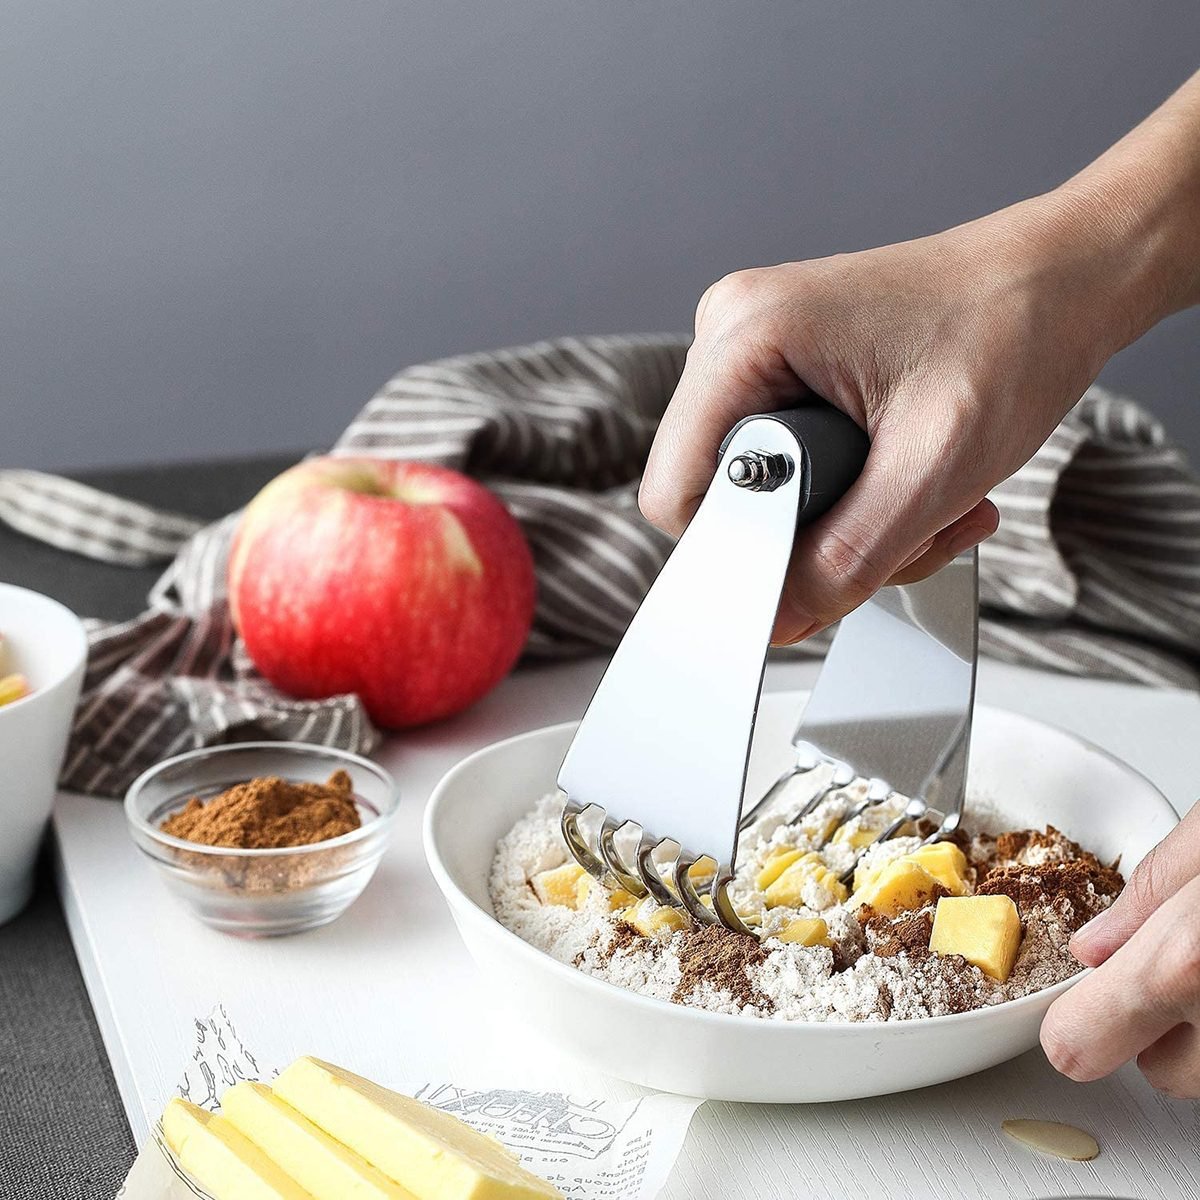 https://www.tasteofhome.com/wp-content/uploads/2023/04/The-13-Best-Kitchen-Utensils-That-Are-Essential-to-Every-Cook_FT_via-amazon.com_.jpg